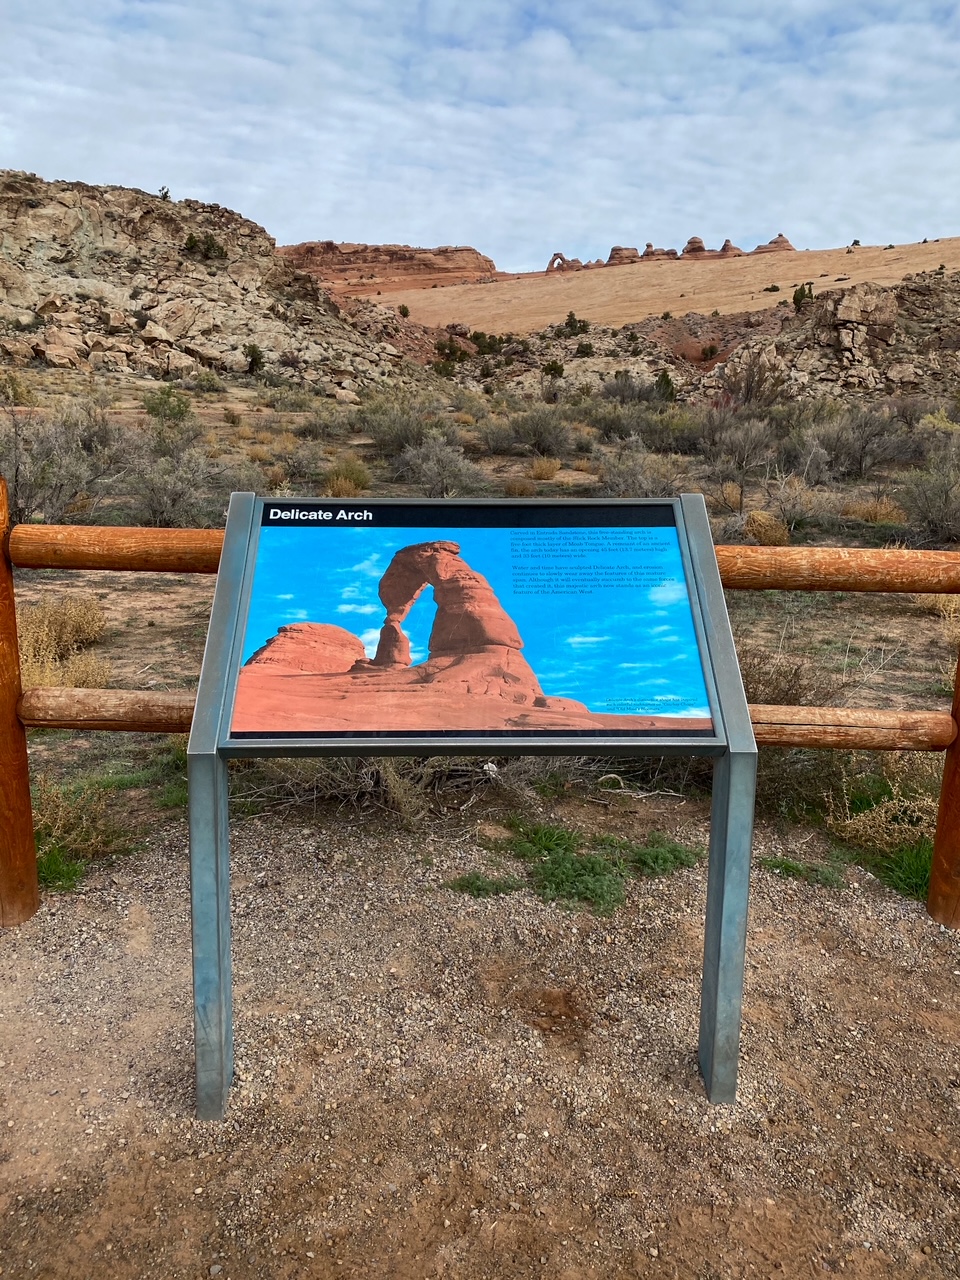 a viewpoint of Delicate Arch, the most popular arch at Arches National Park